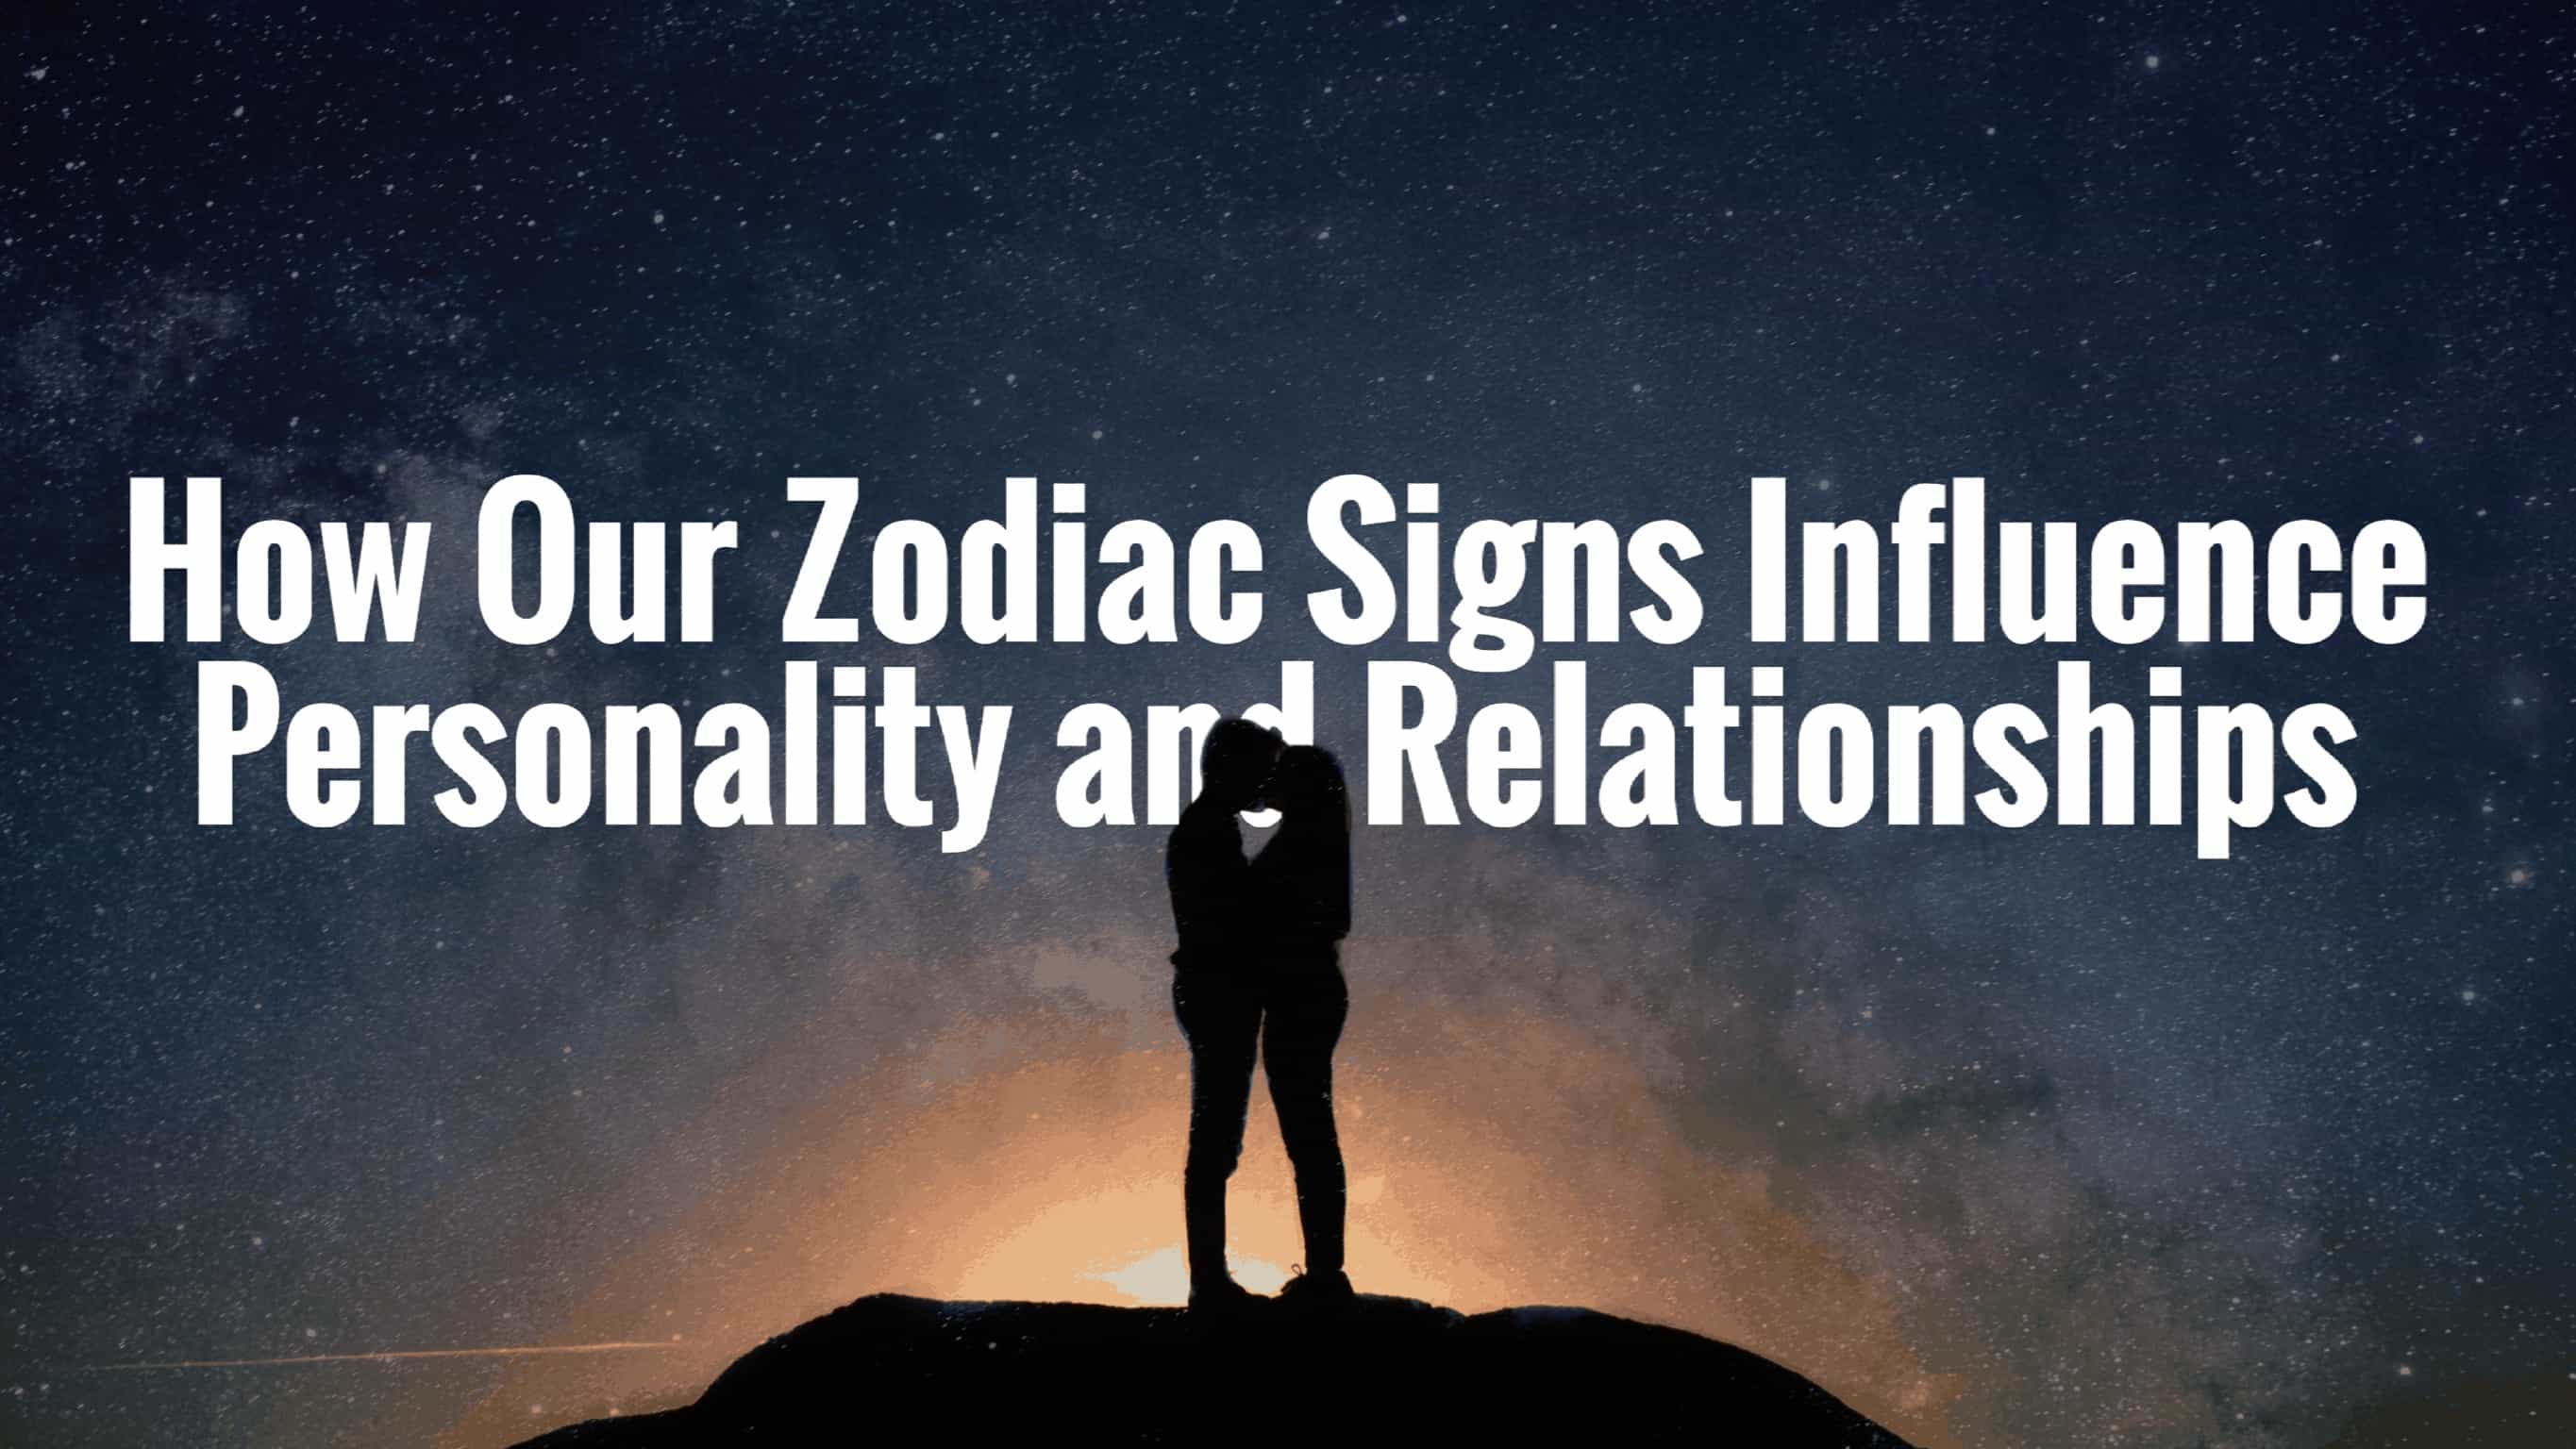 How Our Zodiac Signs Influence Personality and Relationships